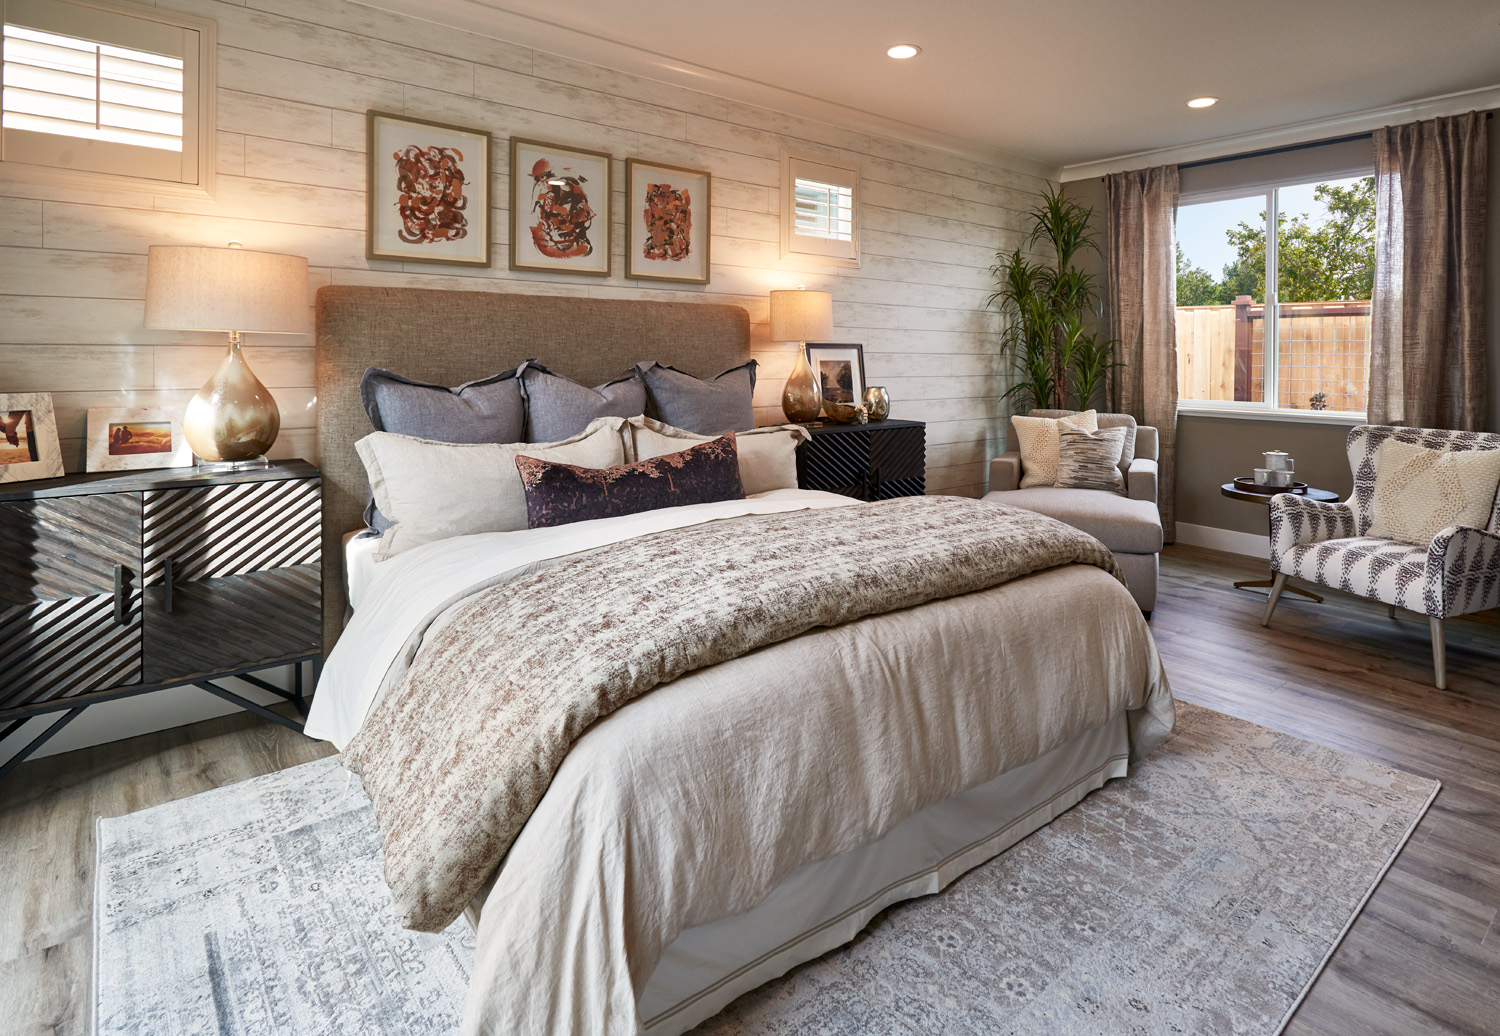 A large master bedroom with beige bedding and a shiplap accent wall